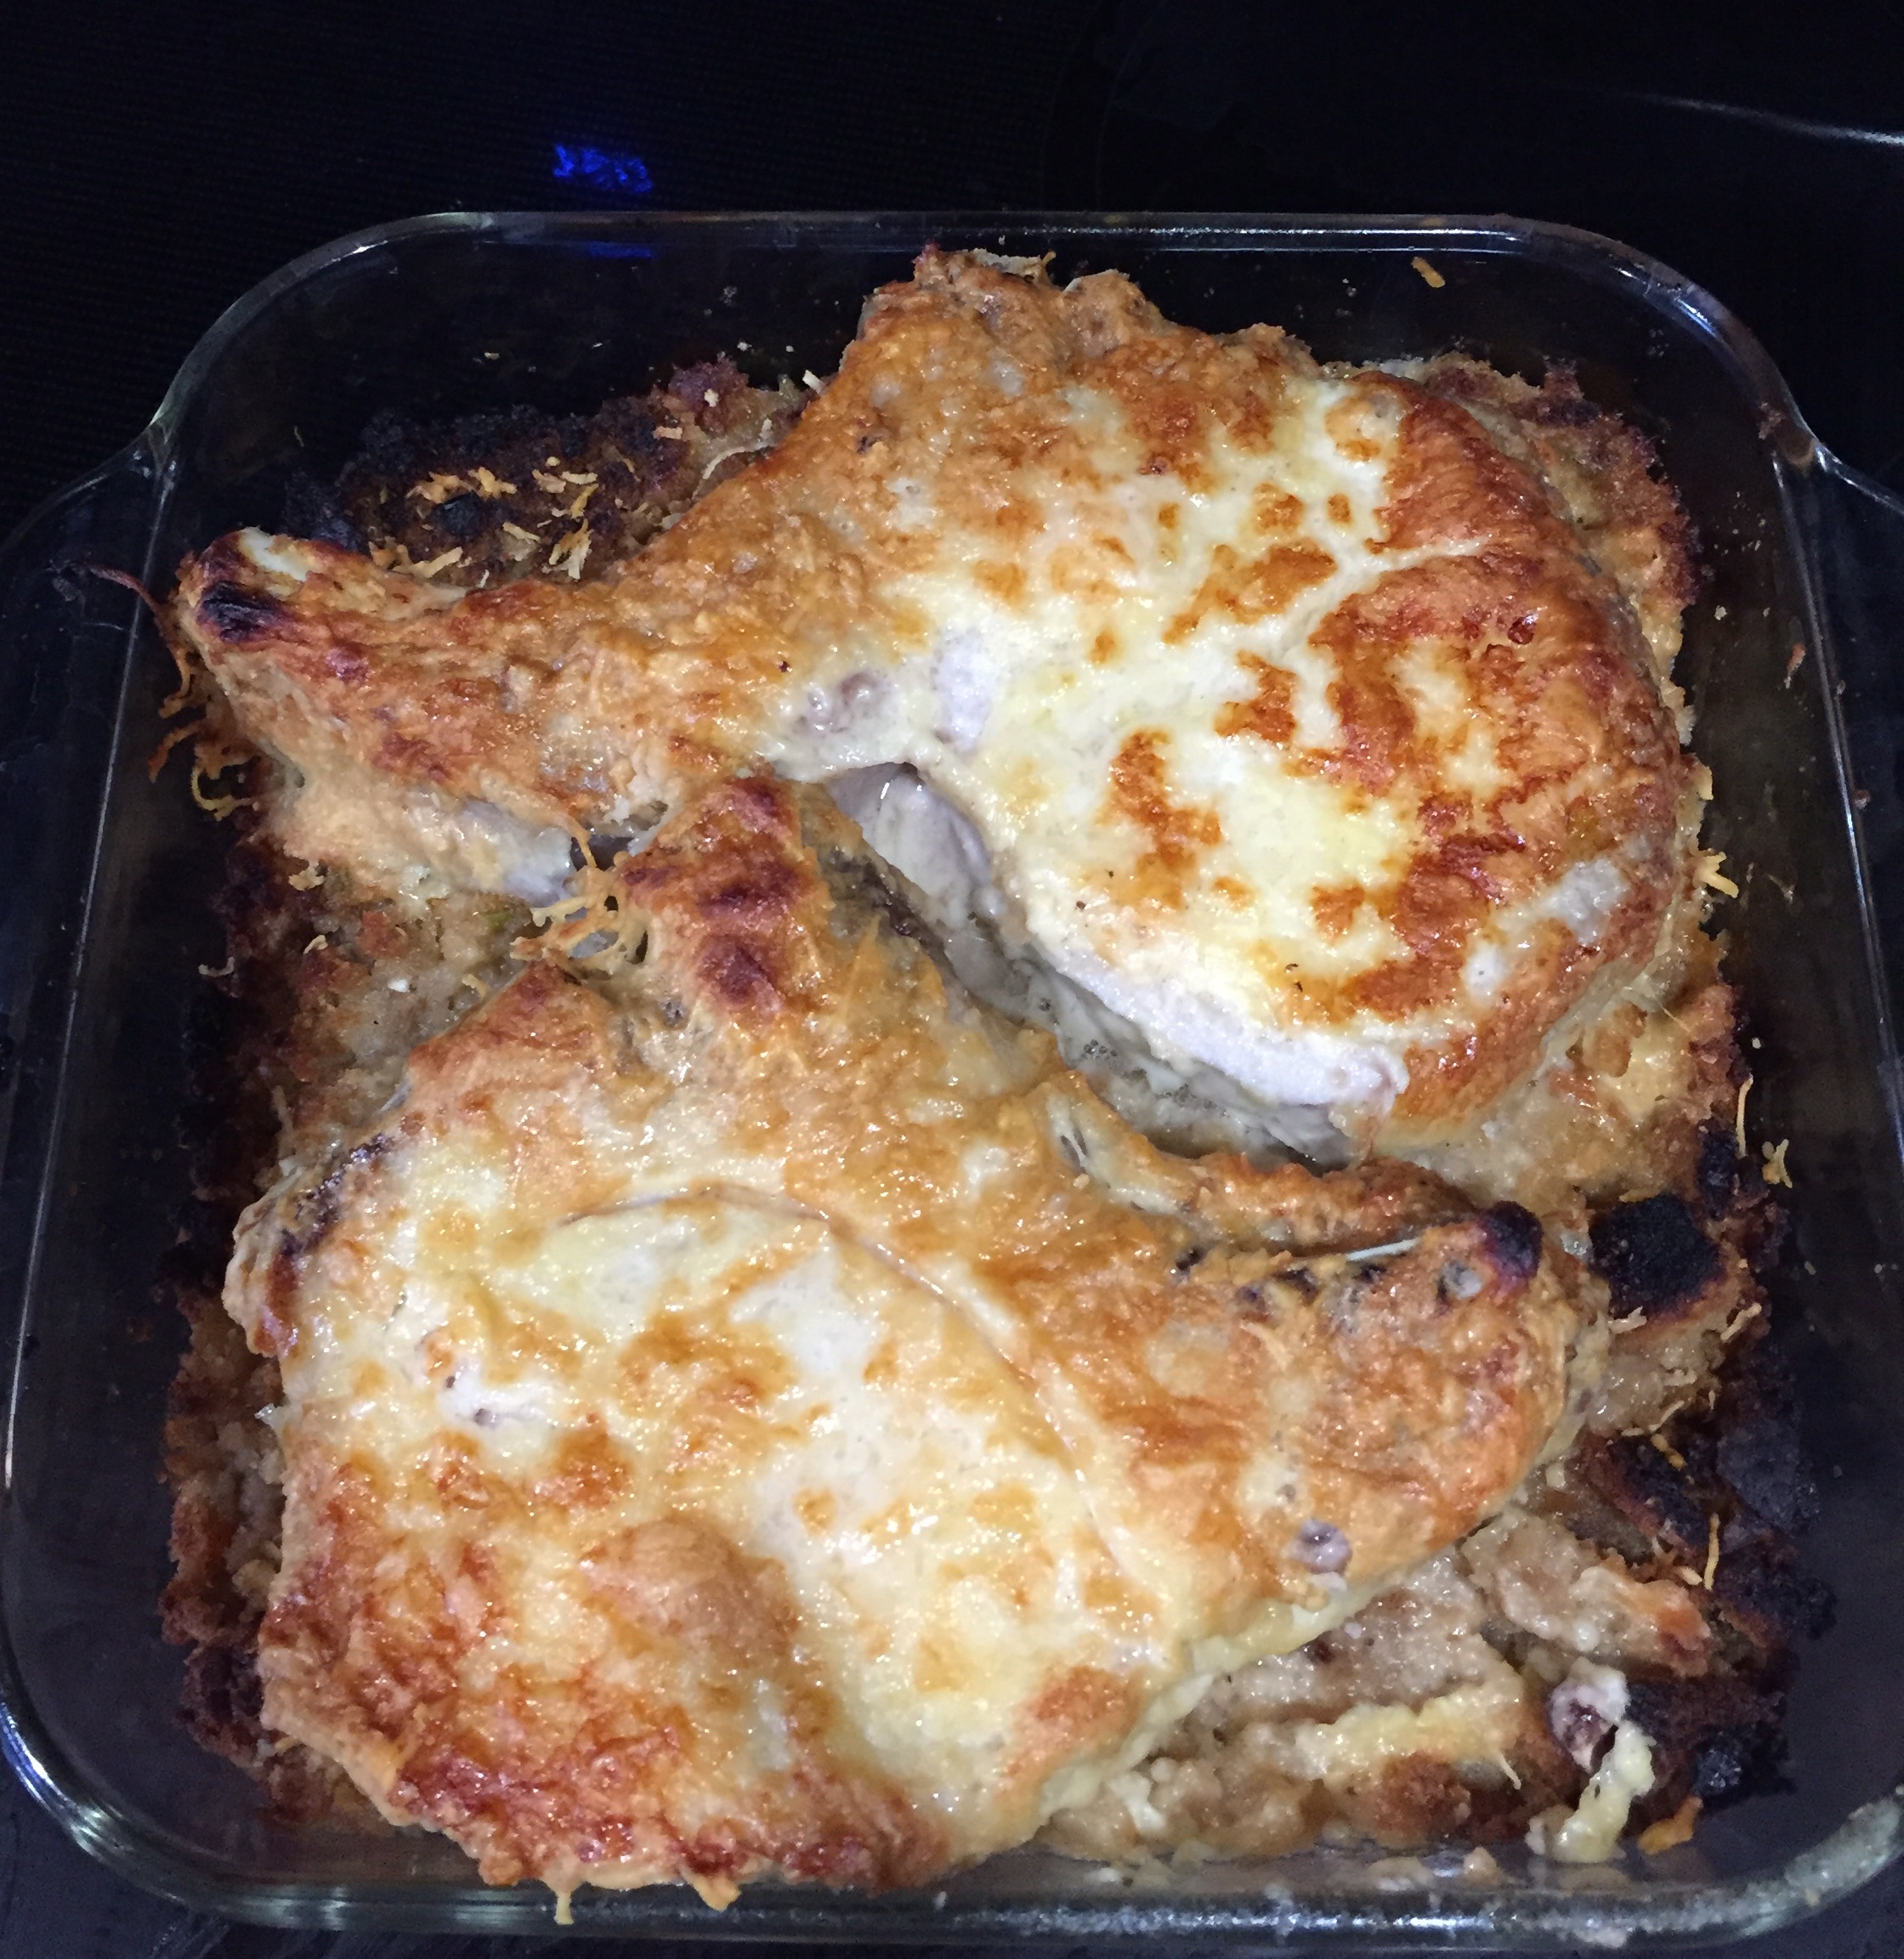 Parmesan-Crusted Pork Chops with Cornbread Stuffing